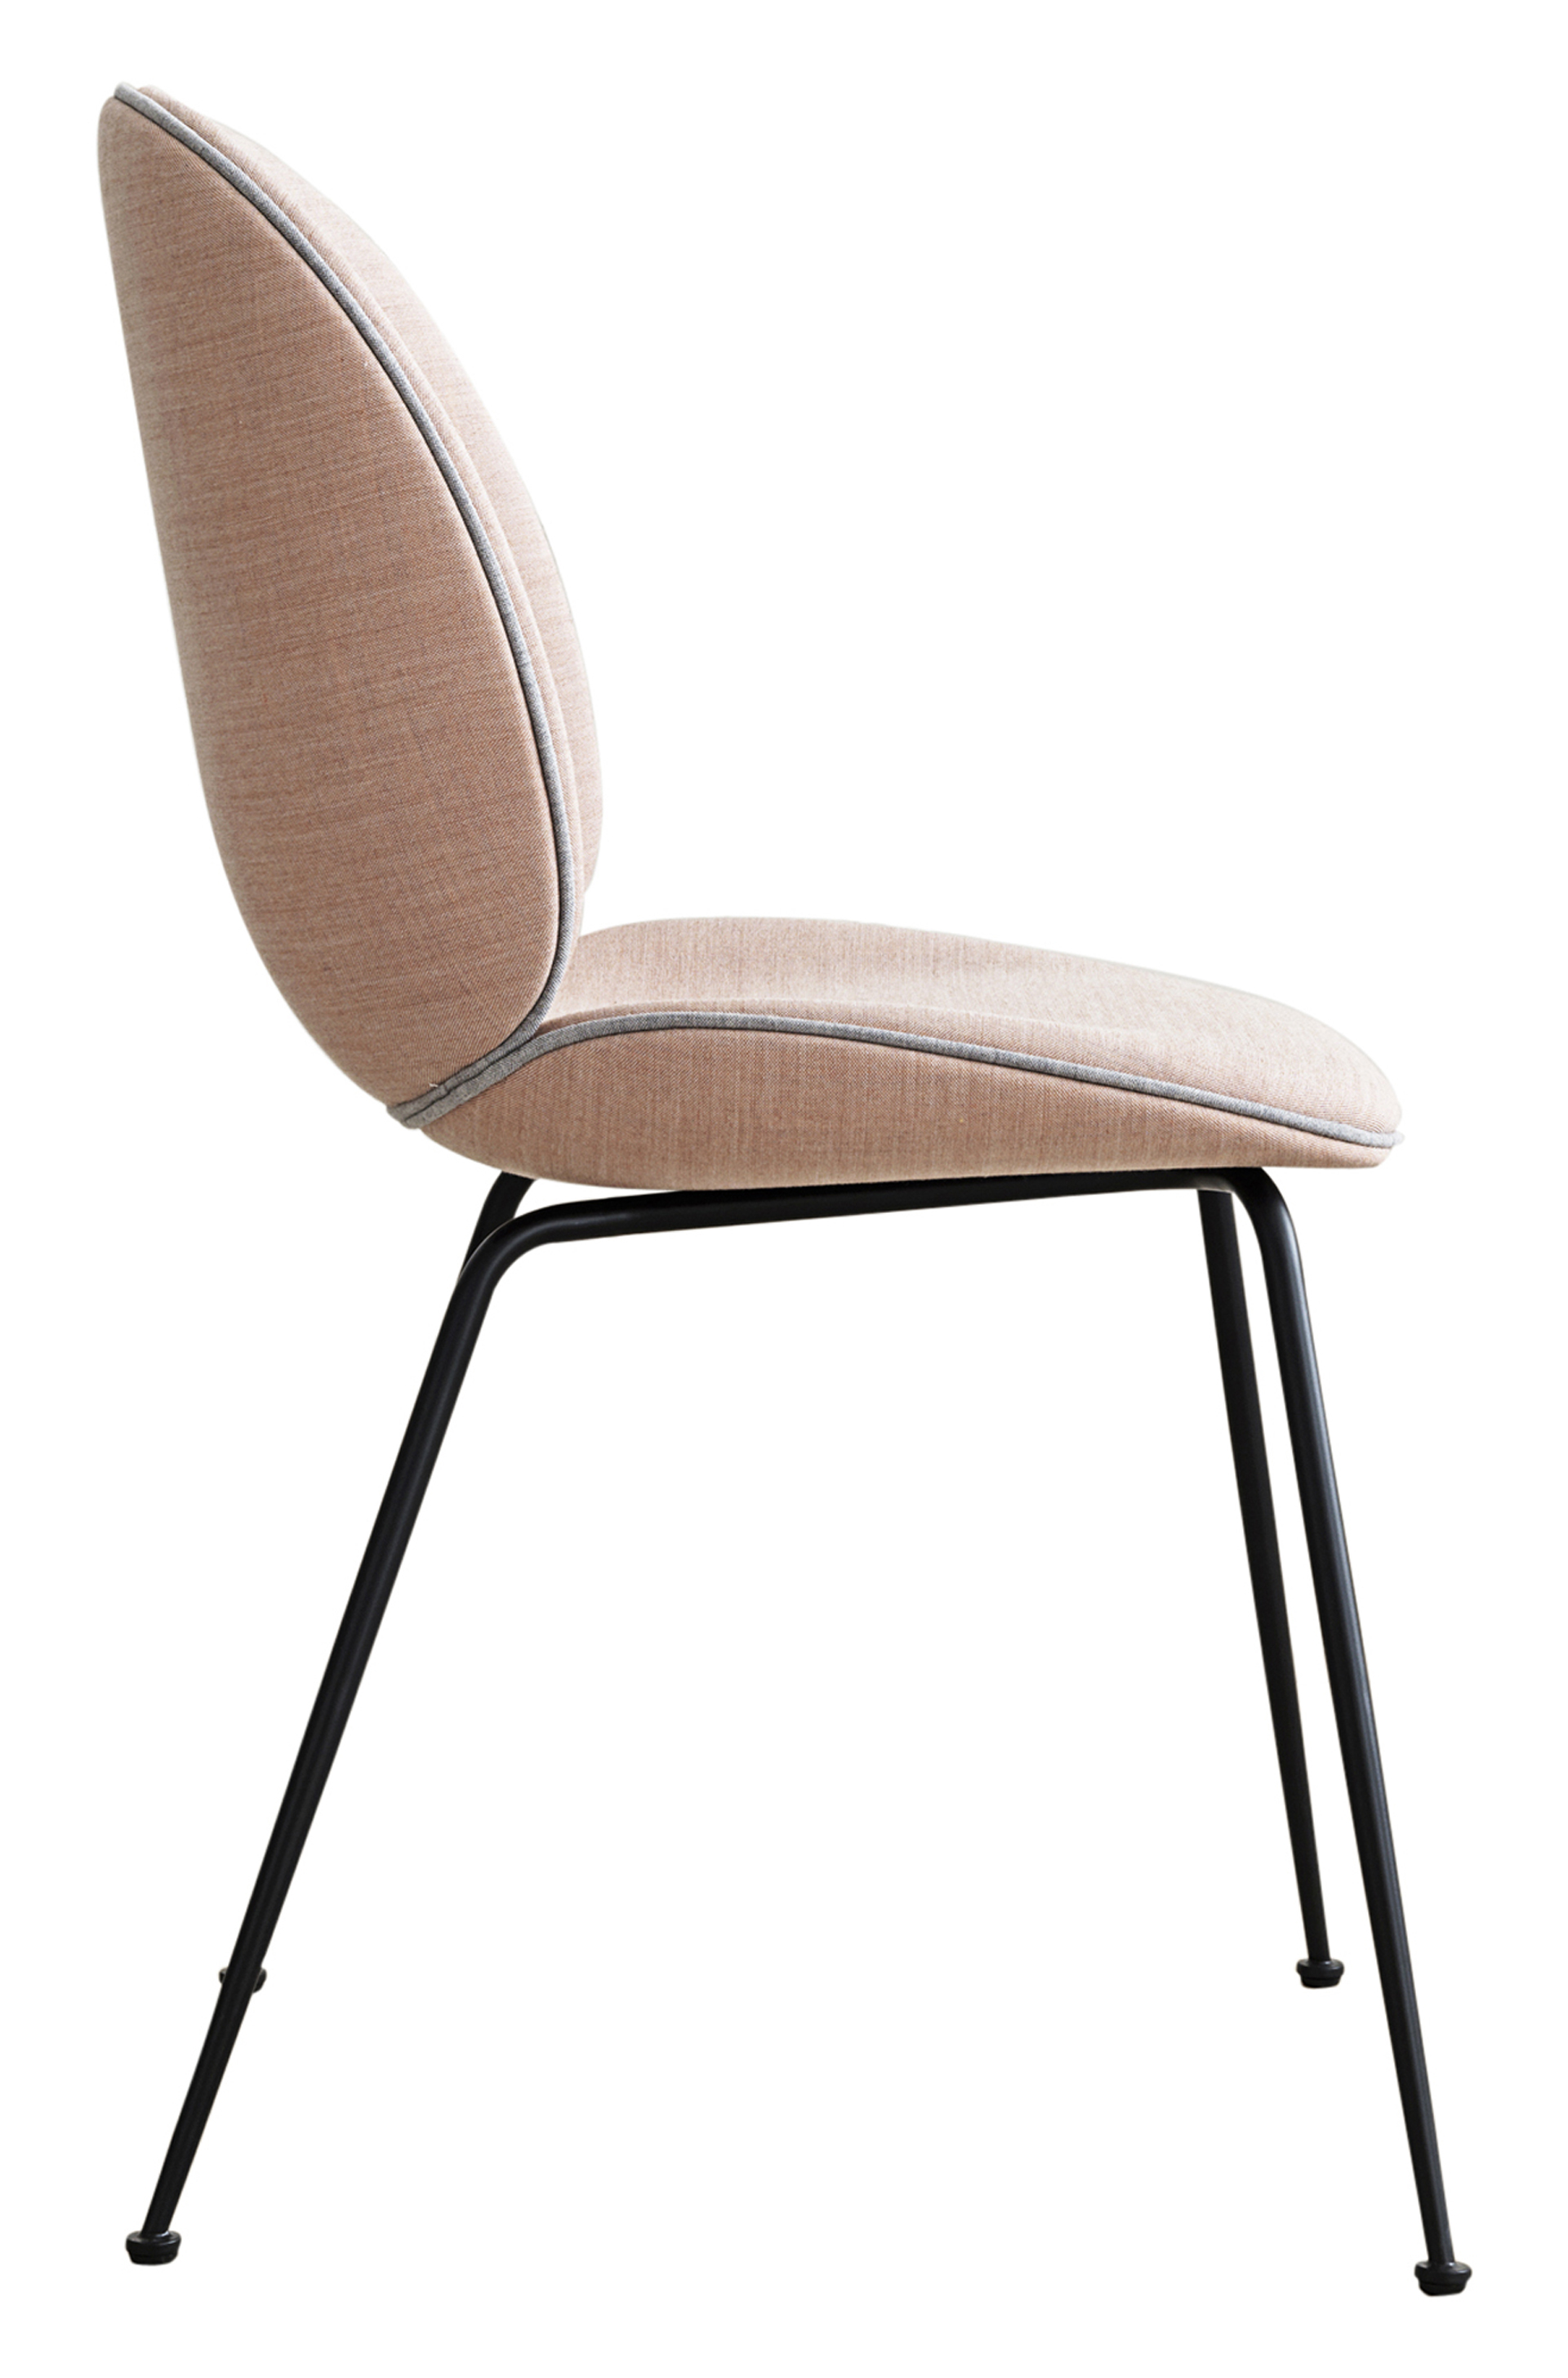 Zoom image Beetle Dining Chair Contemporary, MidCentury Modern, Metal,  Leather, Upholstery Fabric, Dining